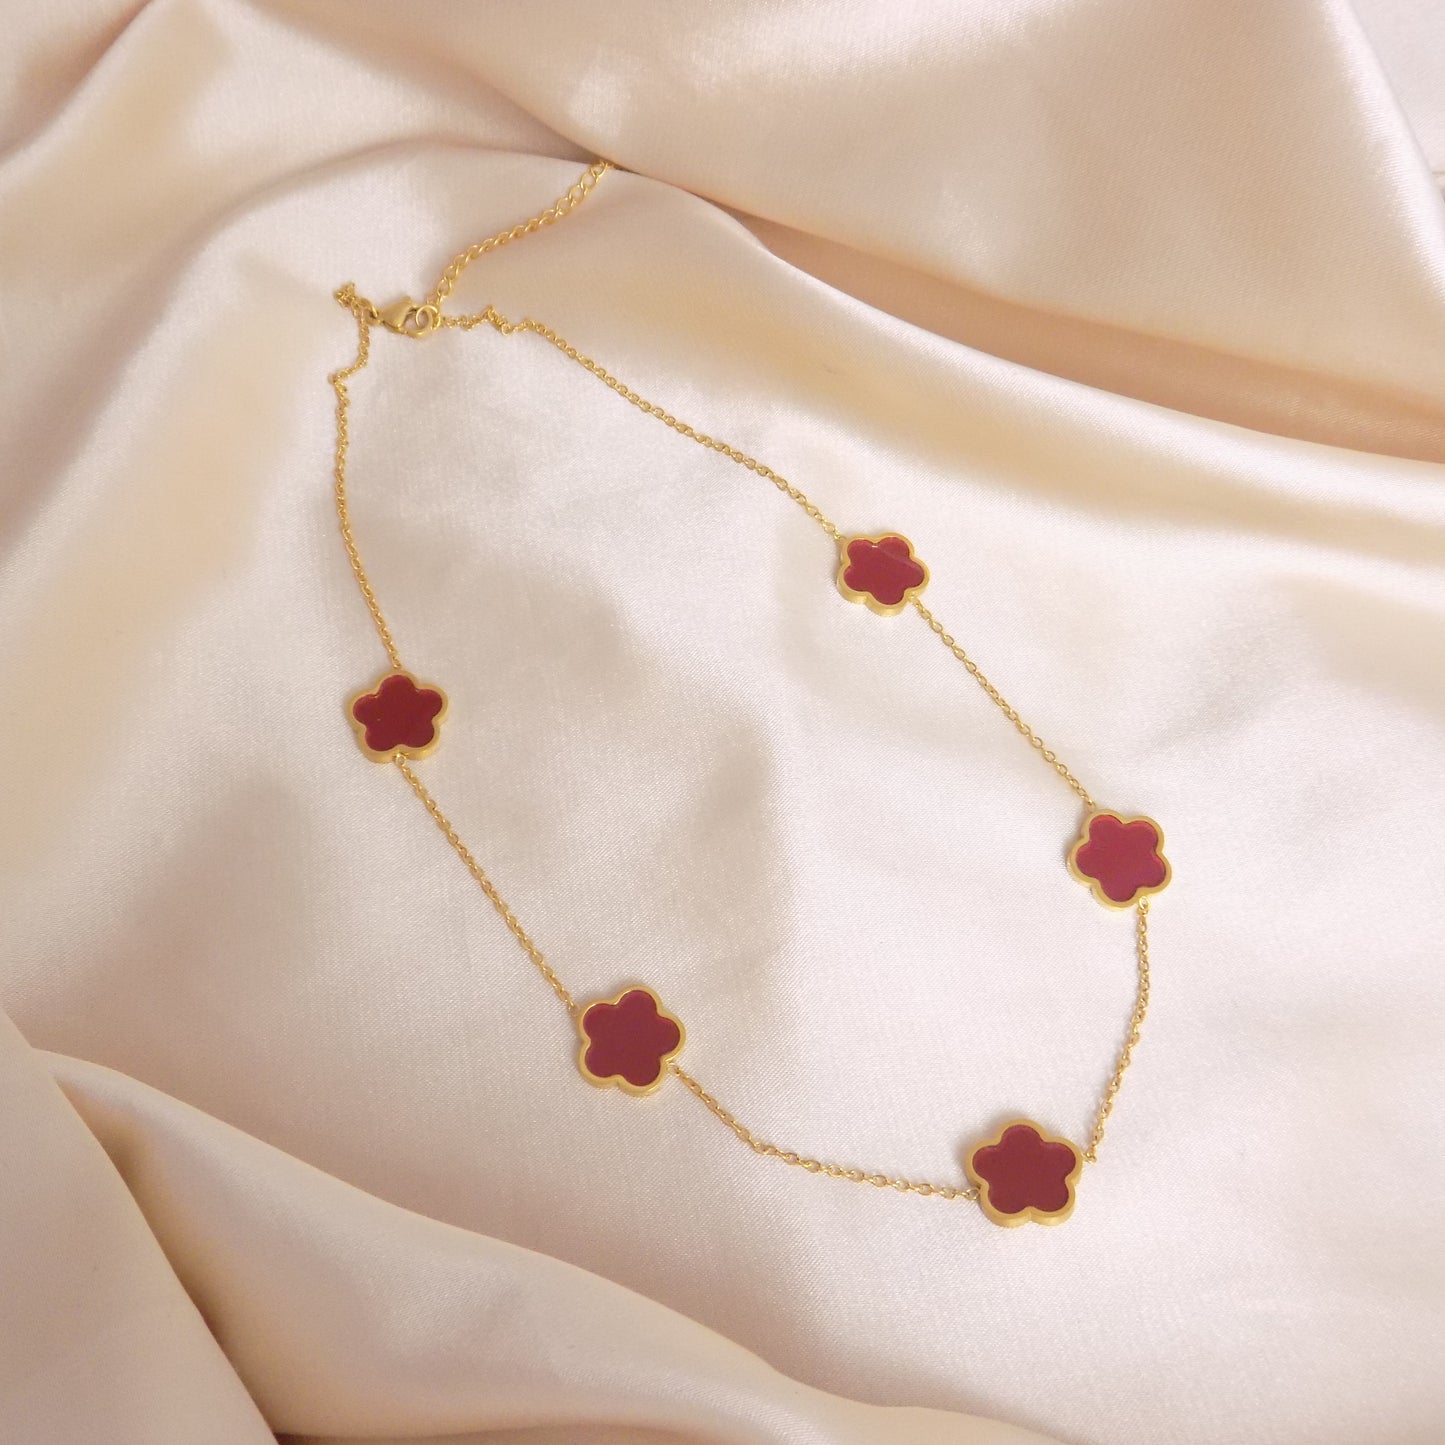 Red Clover Necklace 18K Gold Stainless Steel 5 Motif Flower Chain